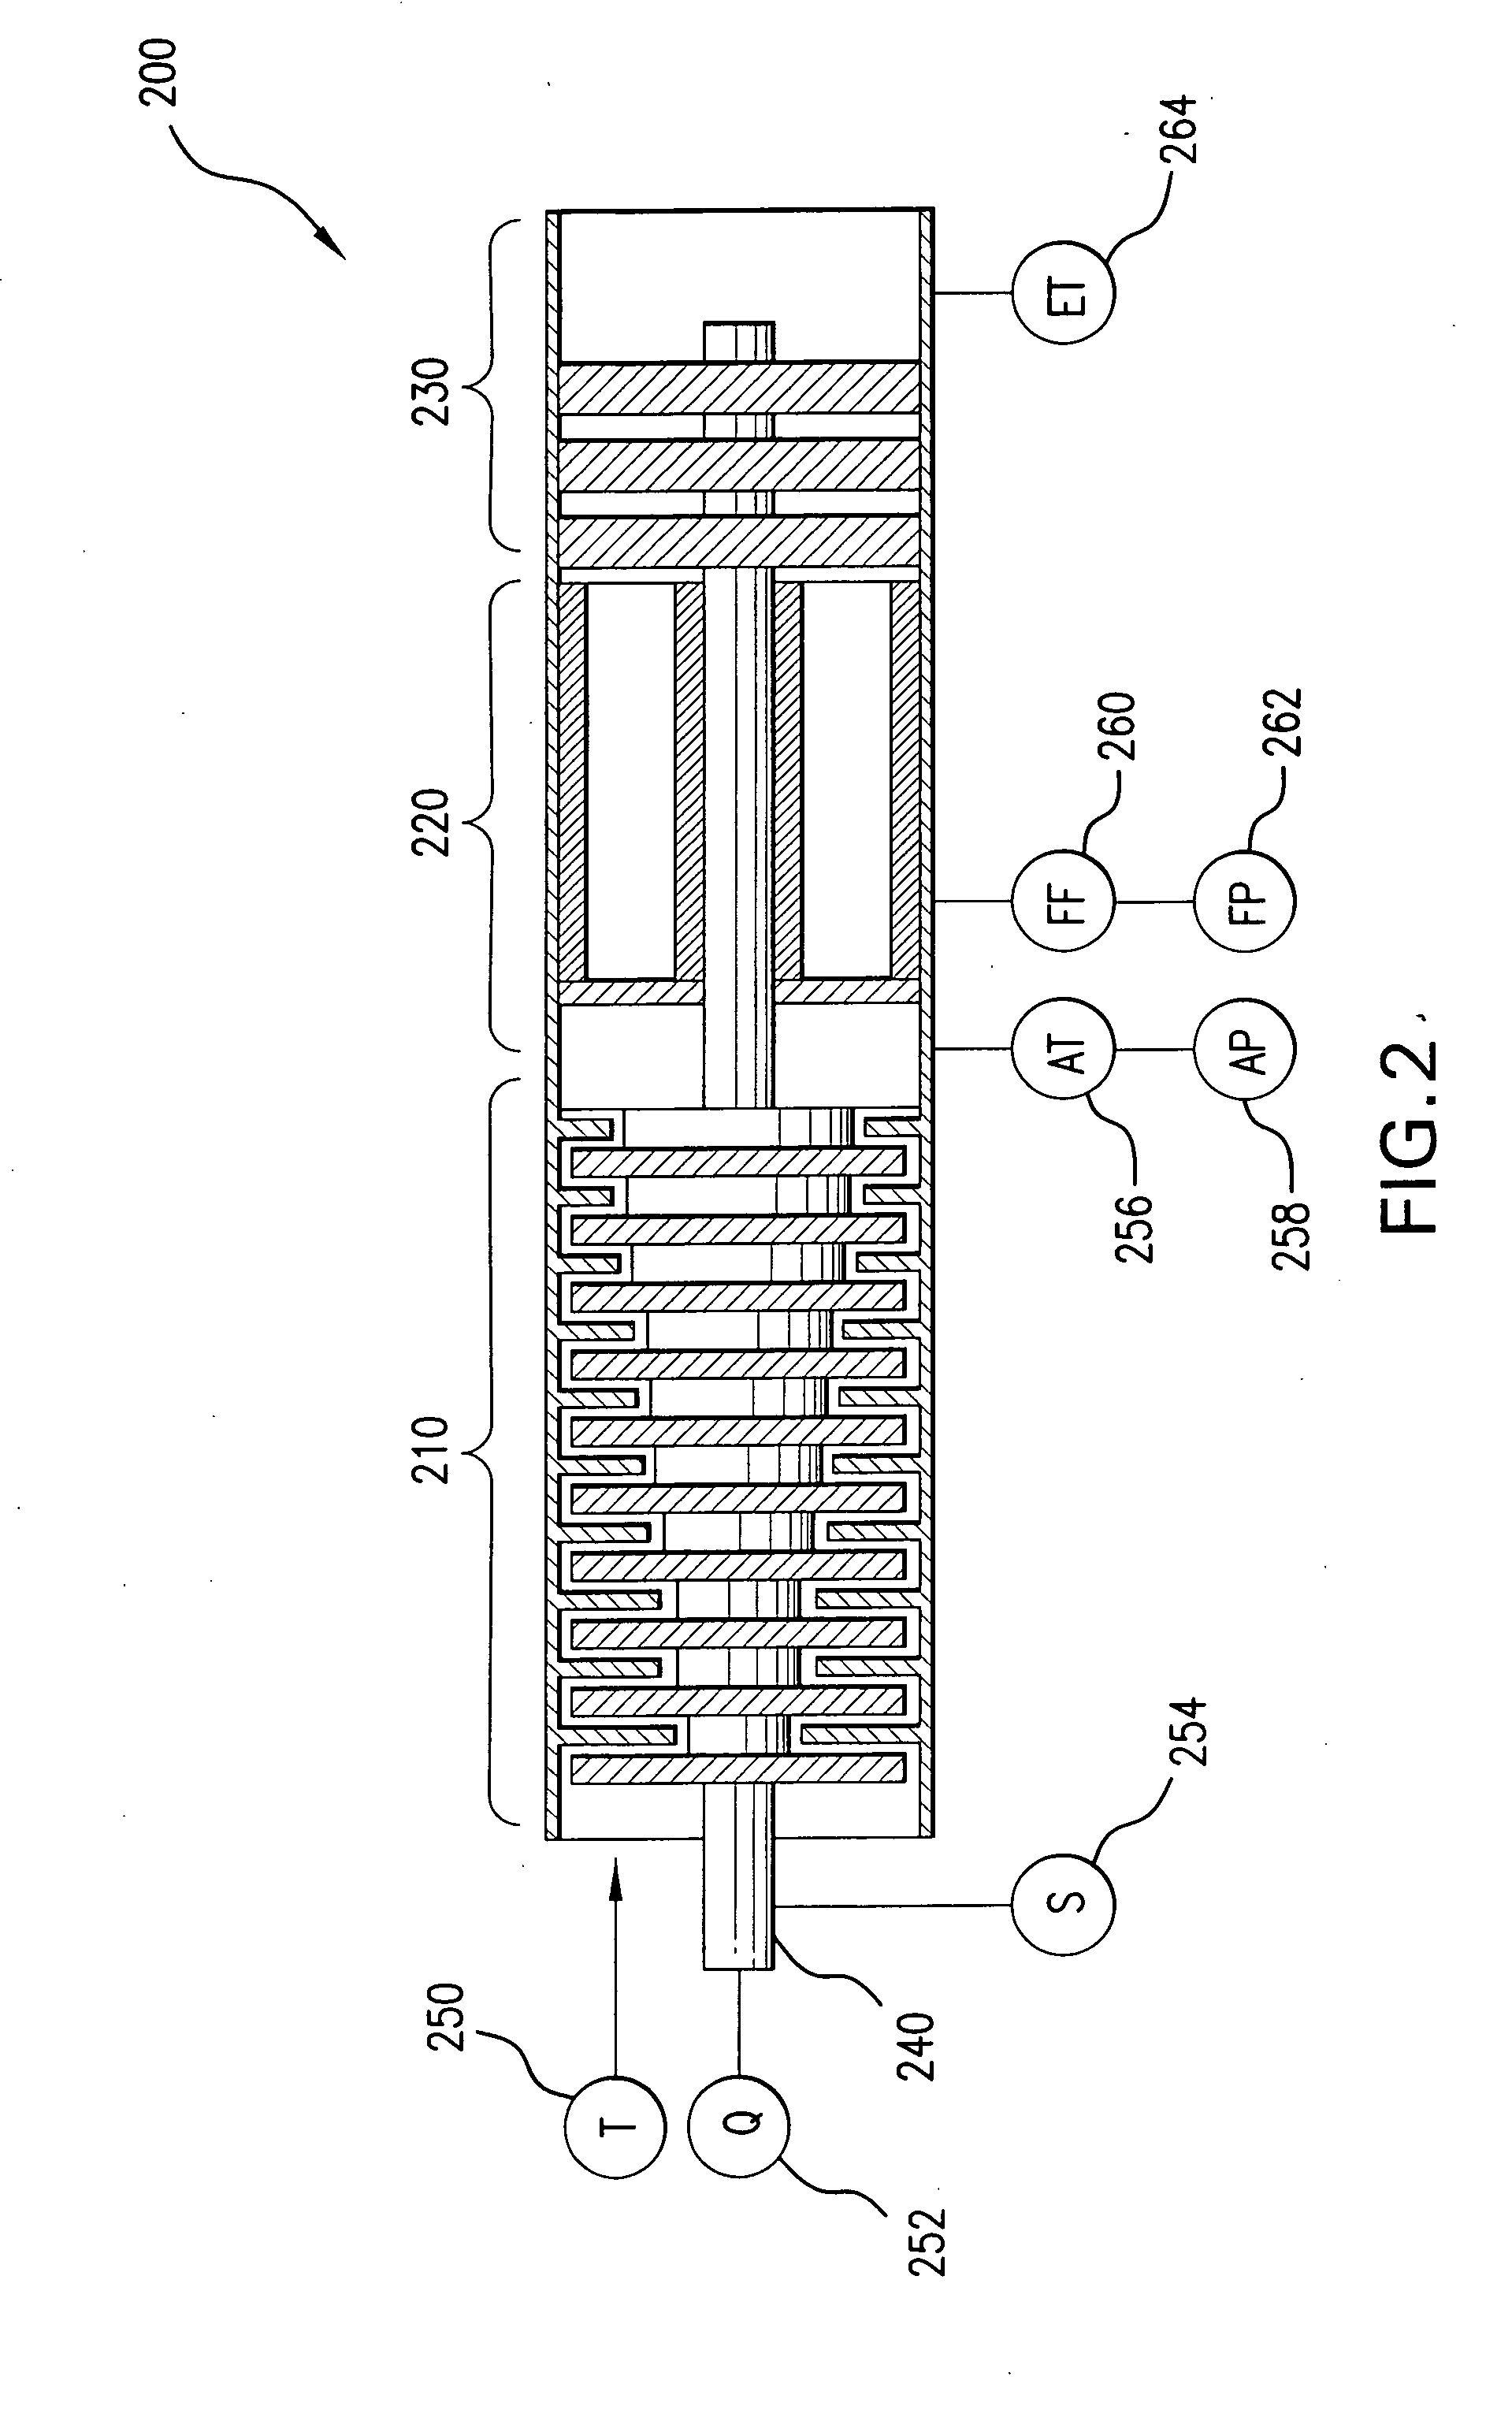 System and method for monitoring aircraft engine health and determining engine power available, and applications thereof